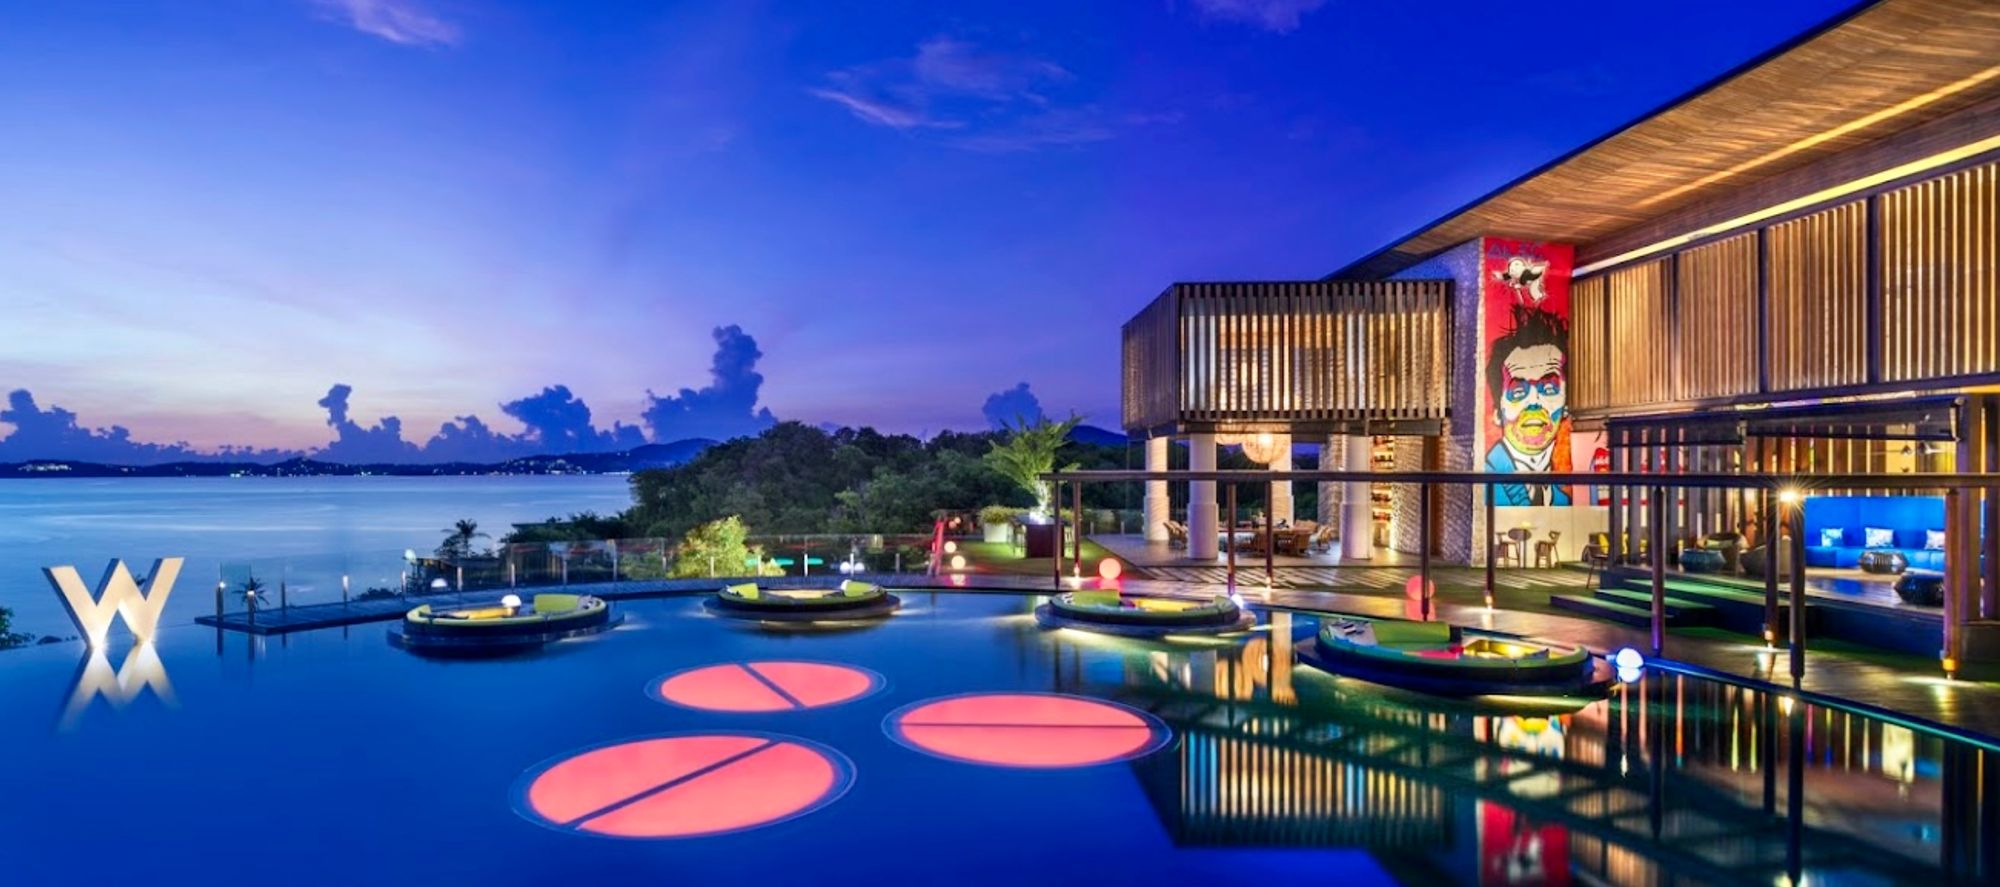 The Woobar @ W Hotel Koh Samui transcends conventional definitions of excellence.